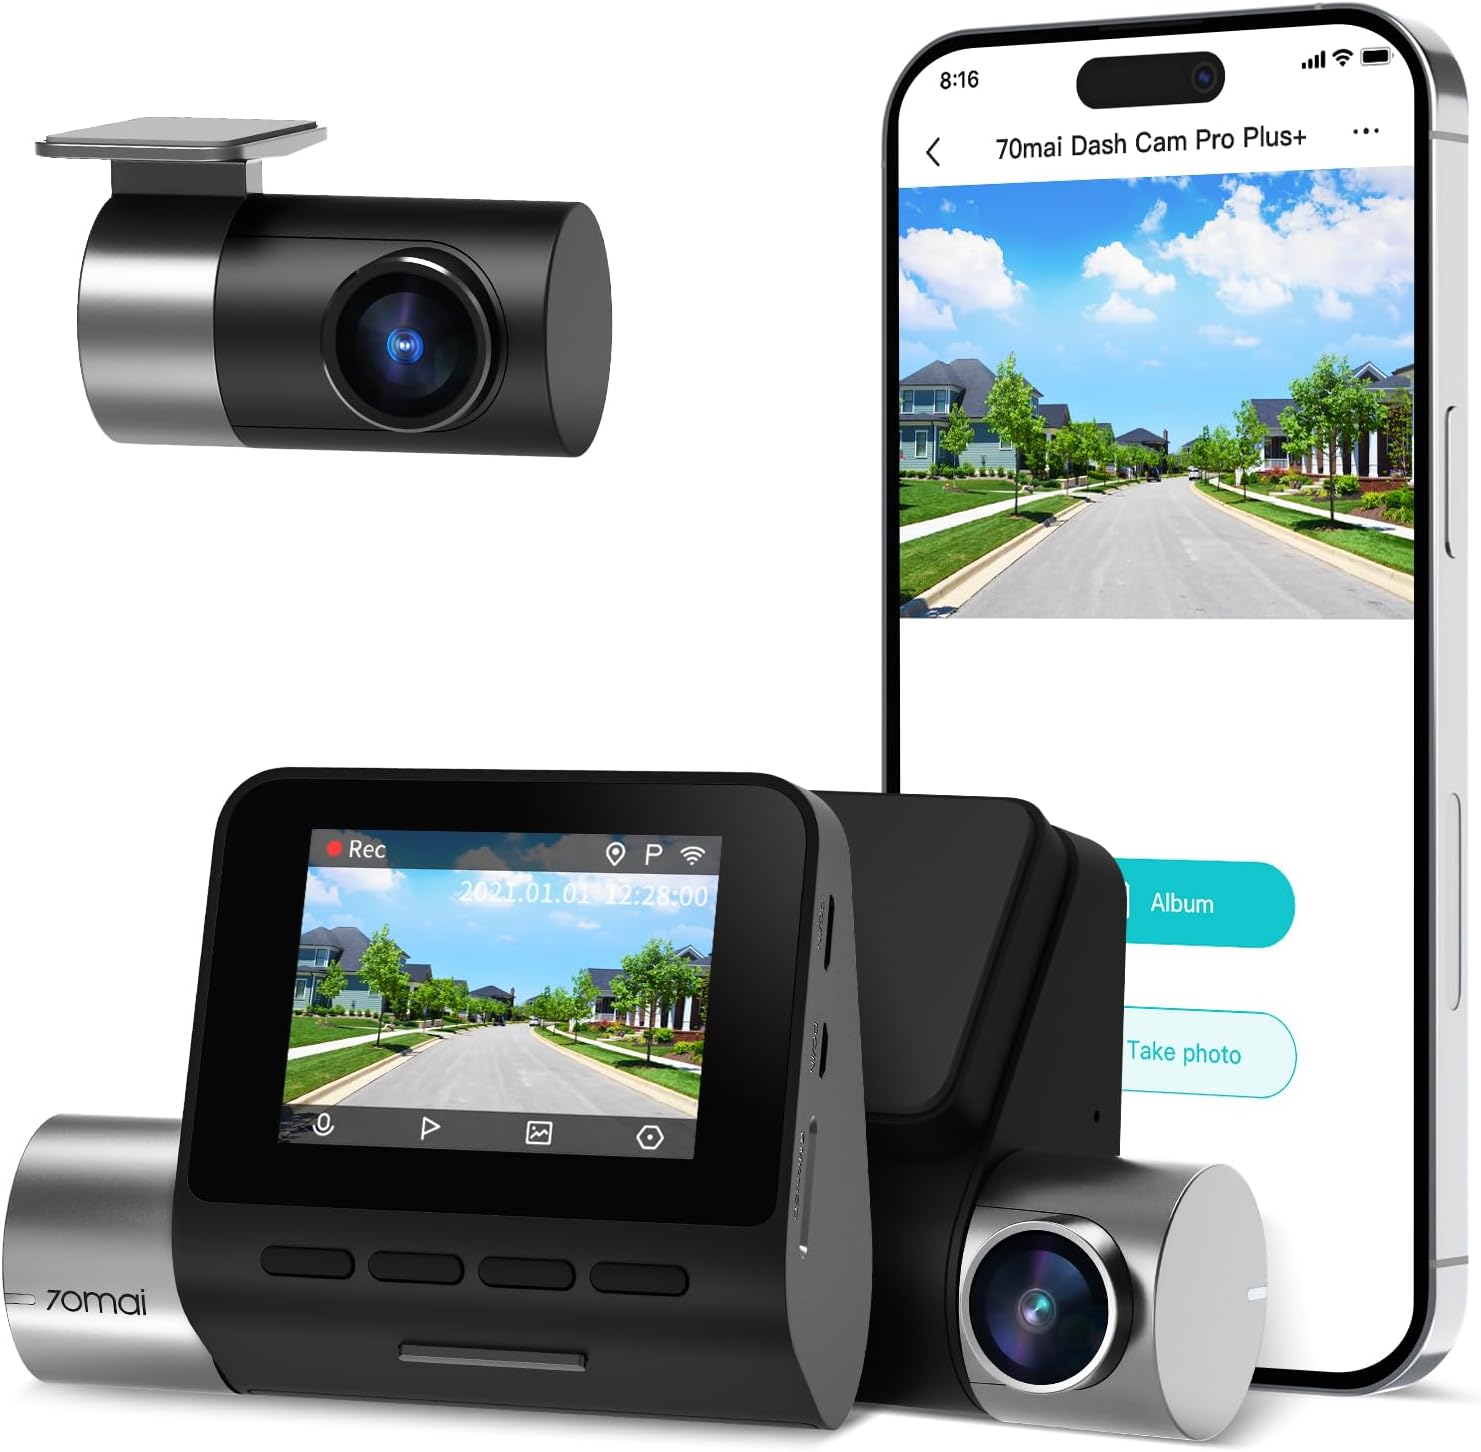 70mai True 2.7K 1944P Ultra Full HD Dash Cam Pro Plus+ A500S, Front and Rear, Built-in WiFi GPS Smart Dash Camera for Cars, ADAS, Sony IMX335, 2 IPS LCD Screen, WDR, Night Vision